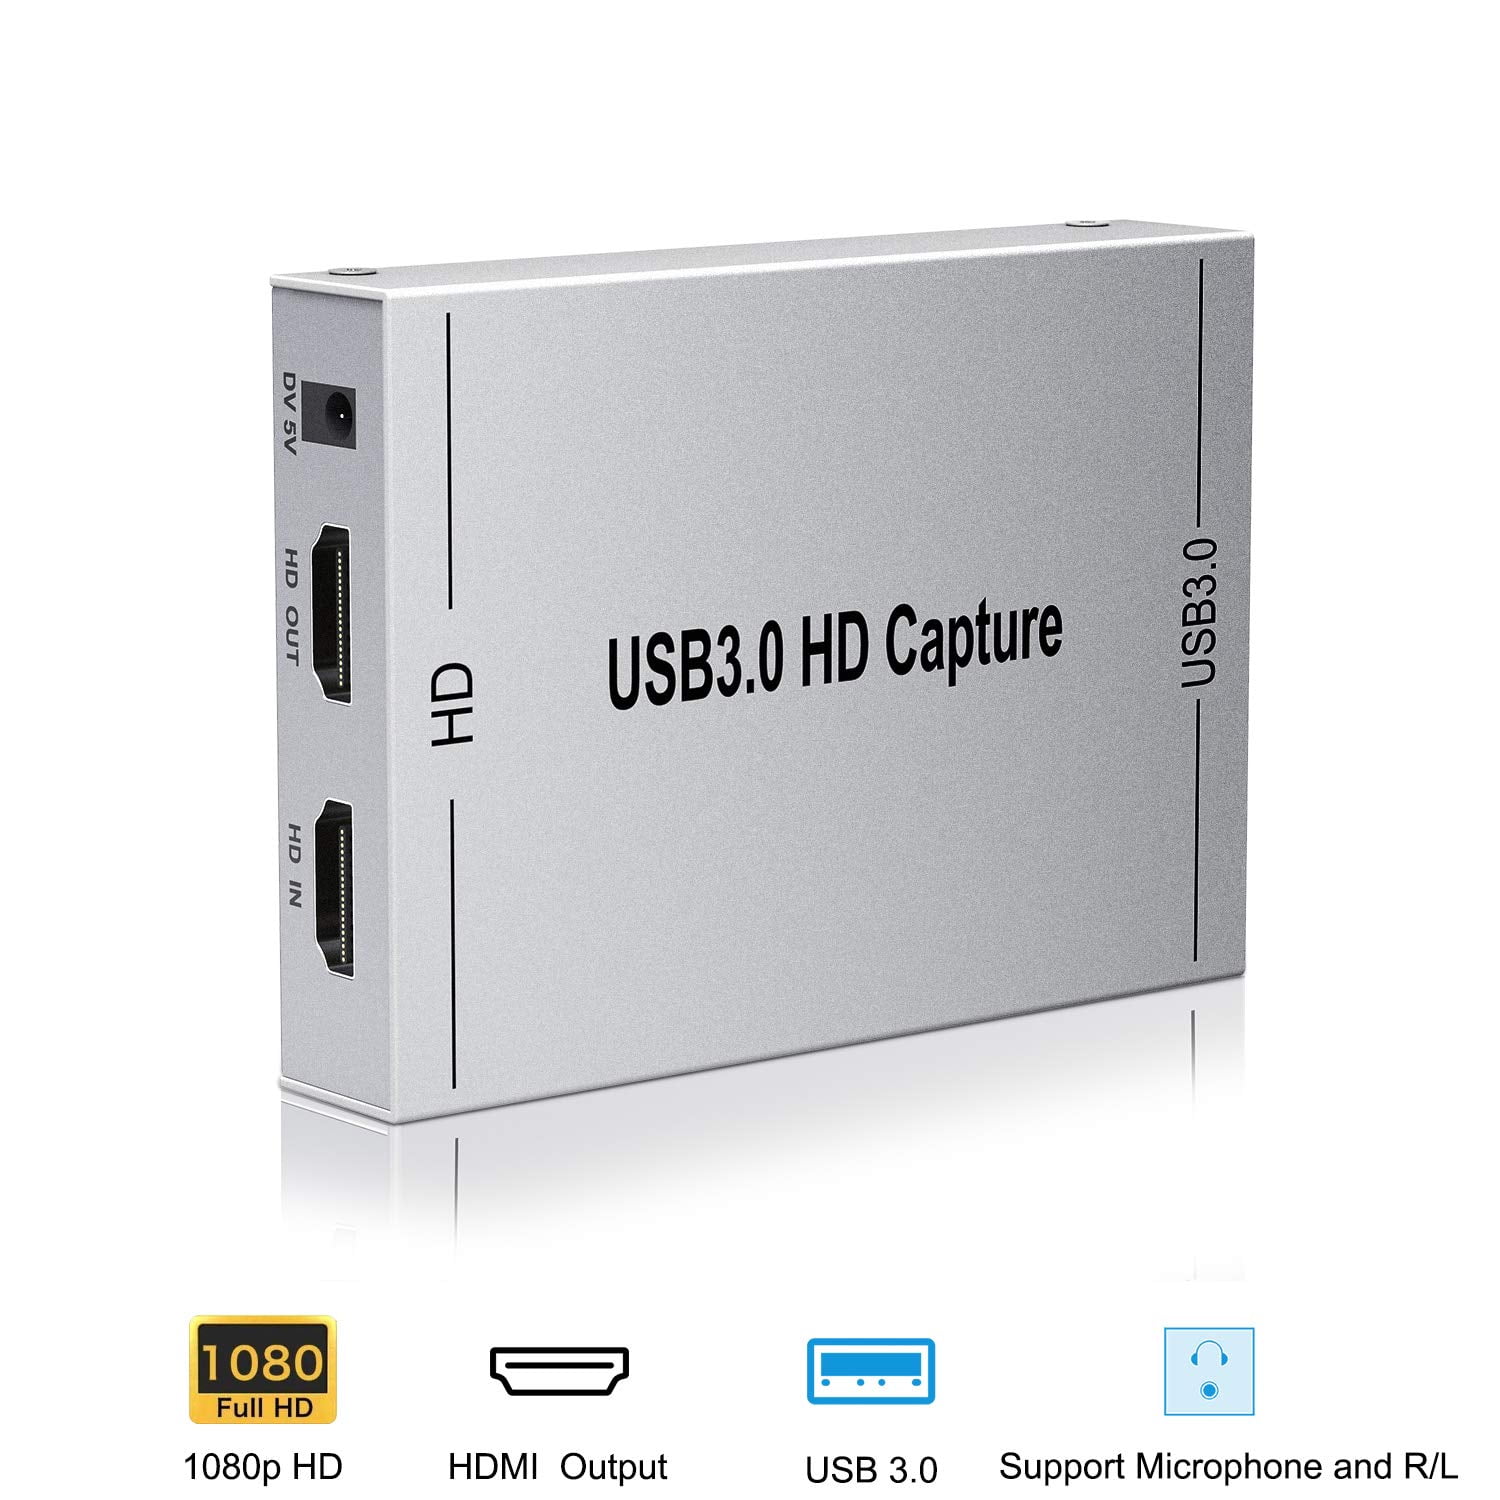 Capture Card,USB 3.0 HDMI Game Capture Card Device With HDMI Loop-out Support HD Video HDCP 1080P Windows 8 10 Linux Youtube OBS Twitch for PS3 PS4 Xbox Wii U Streaming